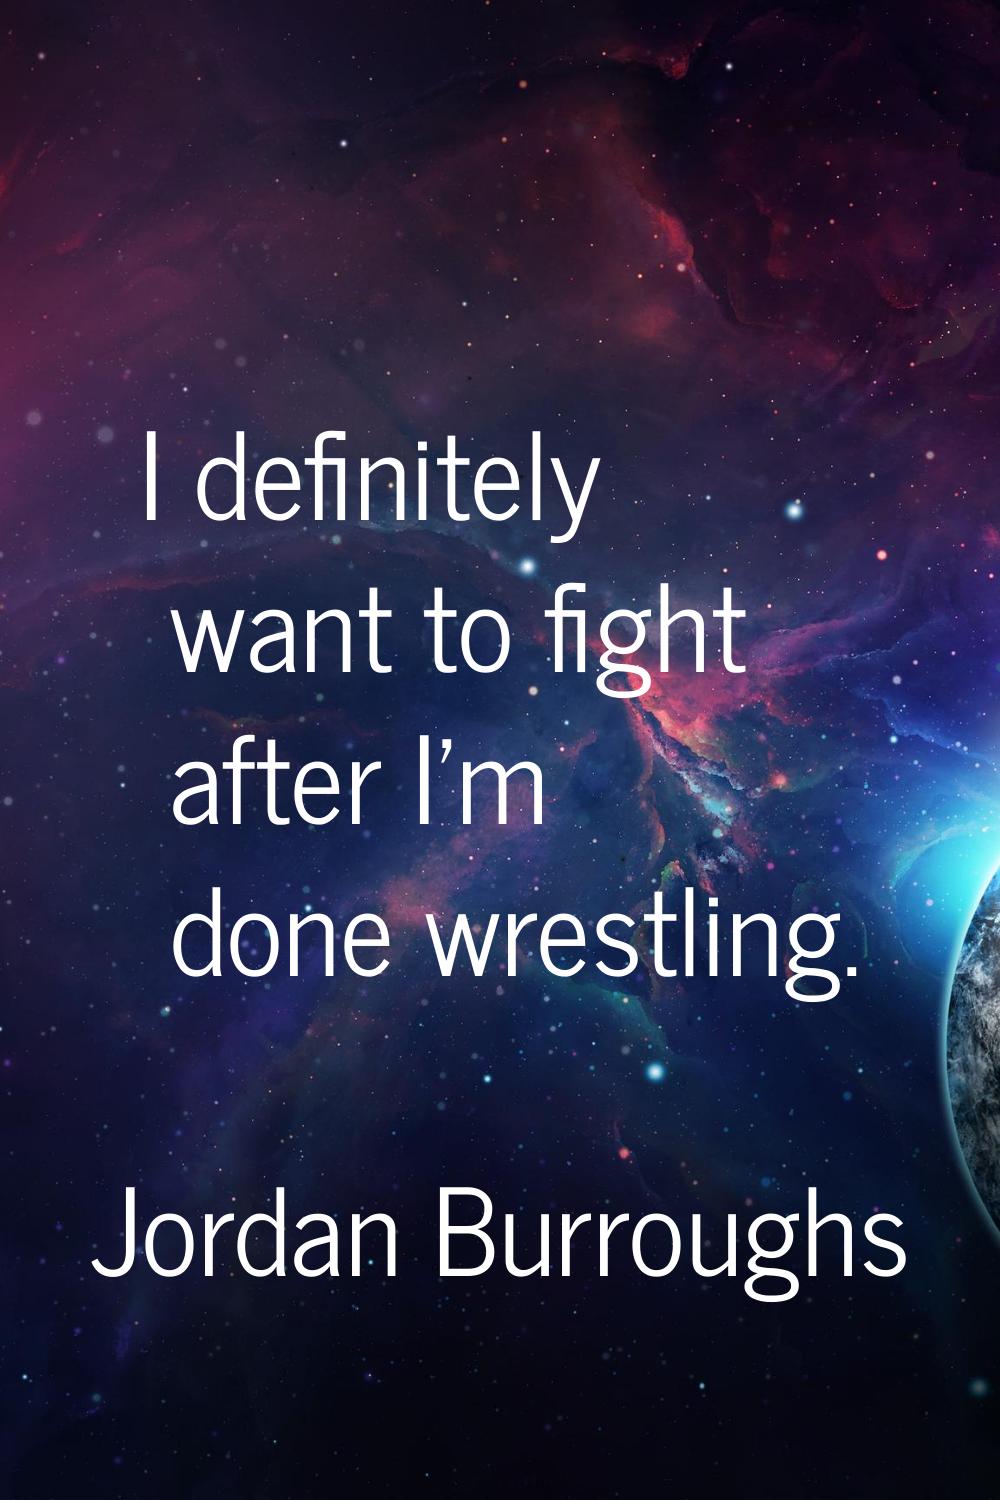 I definitely want to fight after I'm done wrestling.